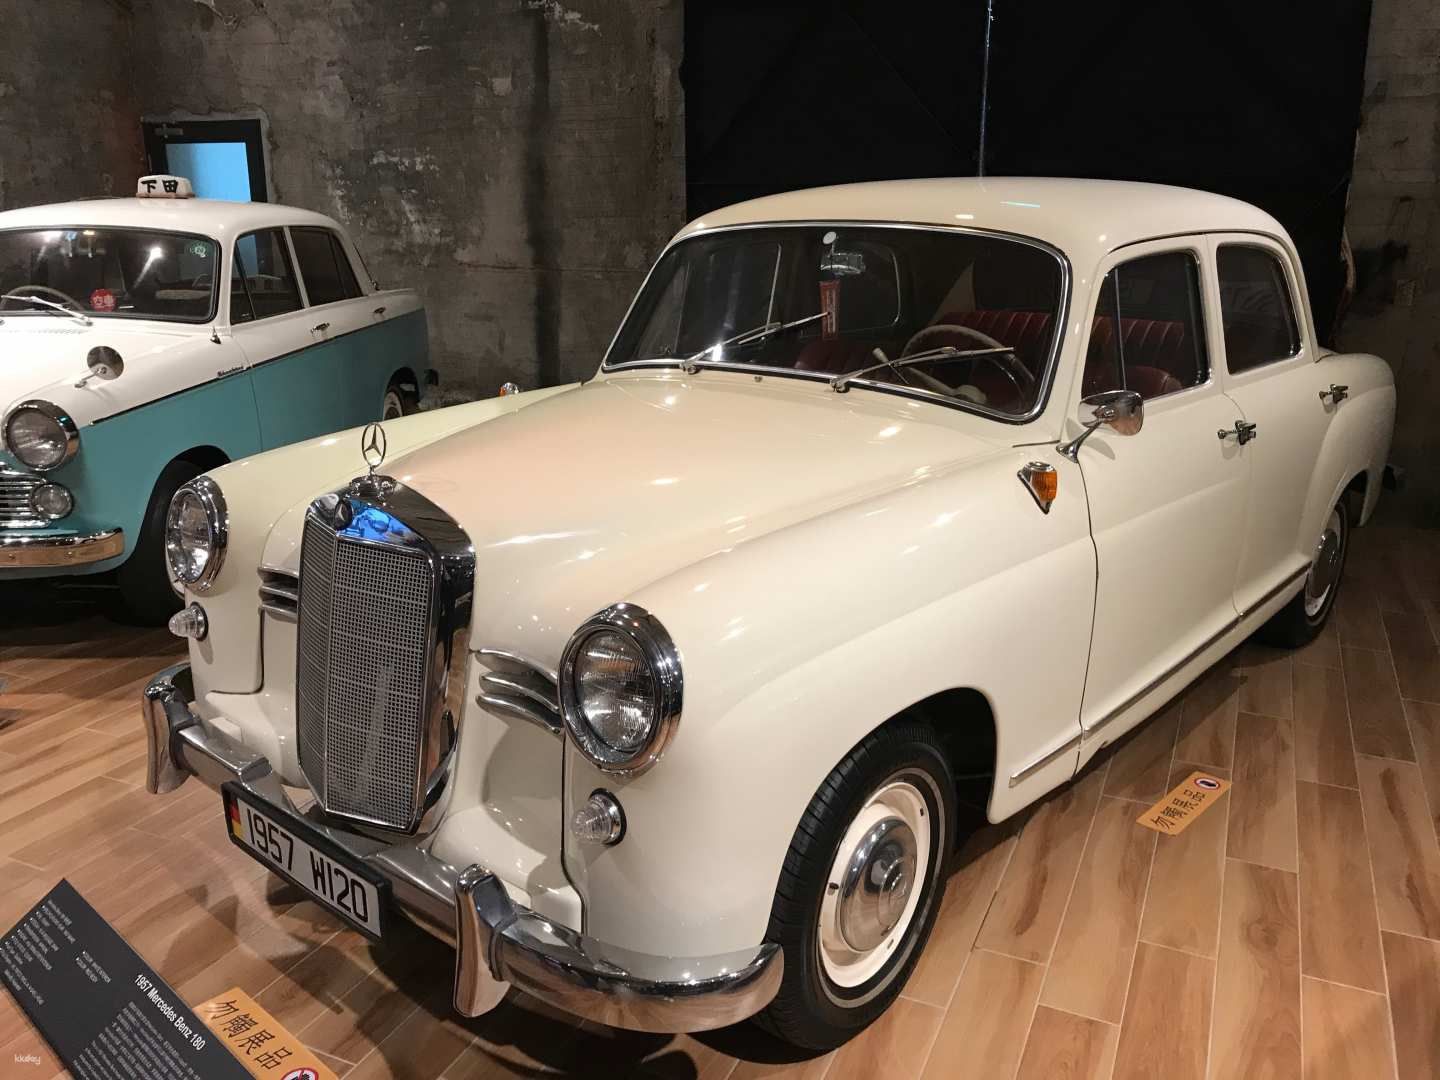 Taxi Museum